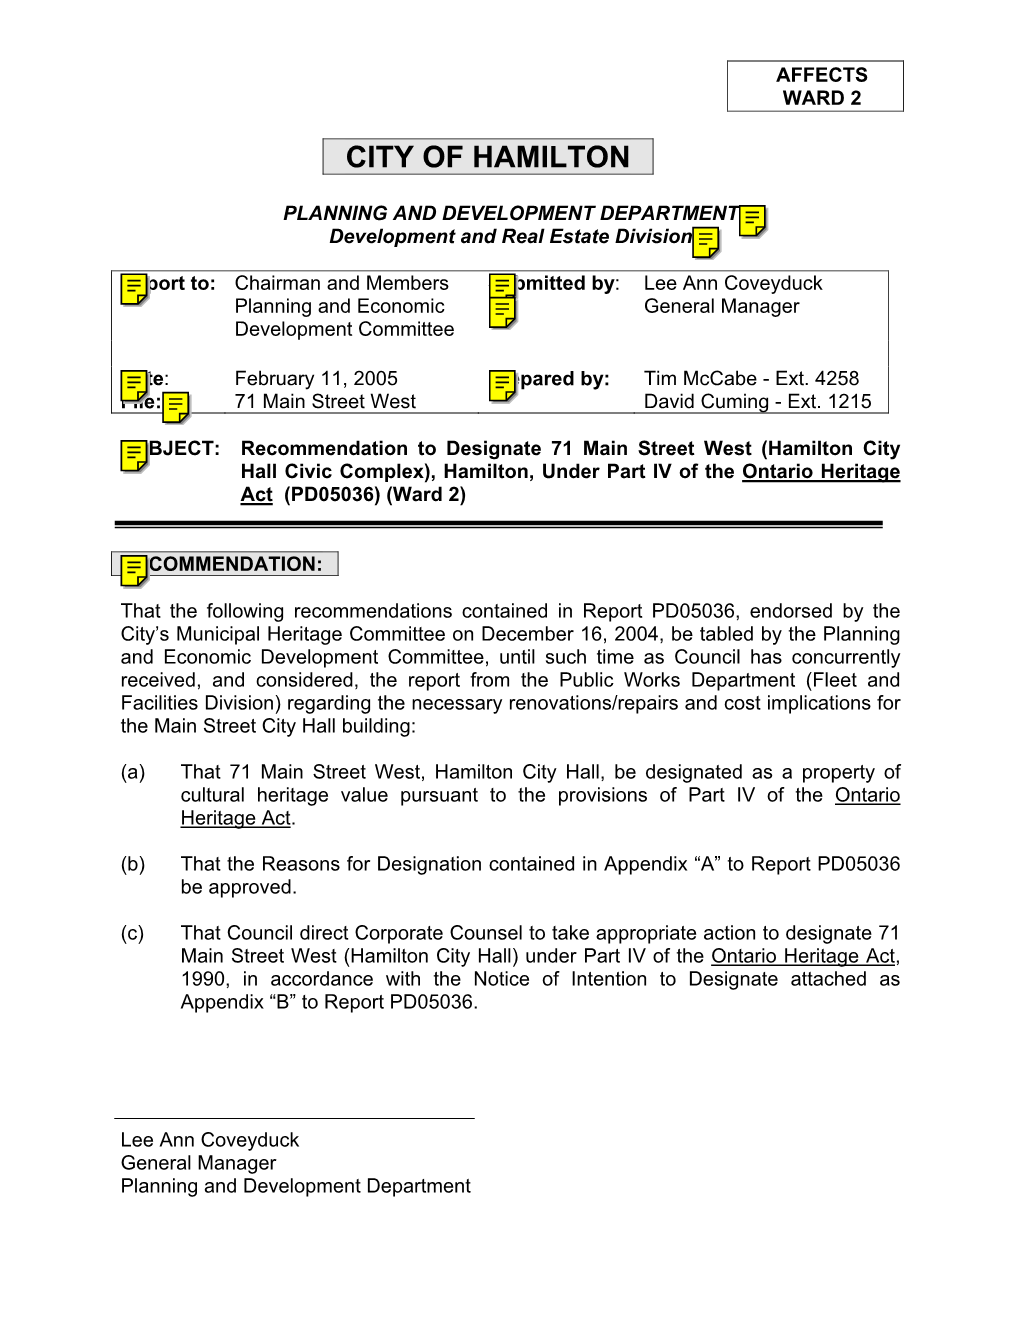 Recommendation to Designate 71 Main Street West (Hamilton City Hall Civic Complex), Hamilton, Under Part IV of the Ontario Heritage Act (PD05036) (Ward 2)